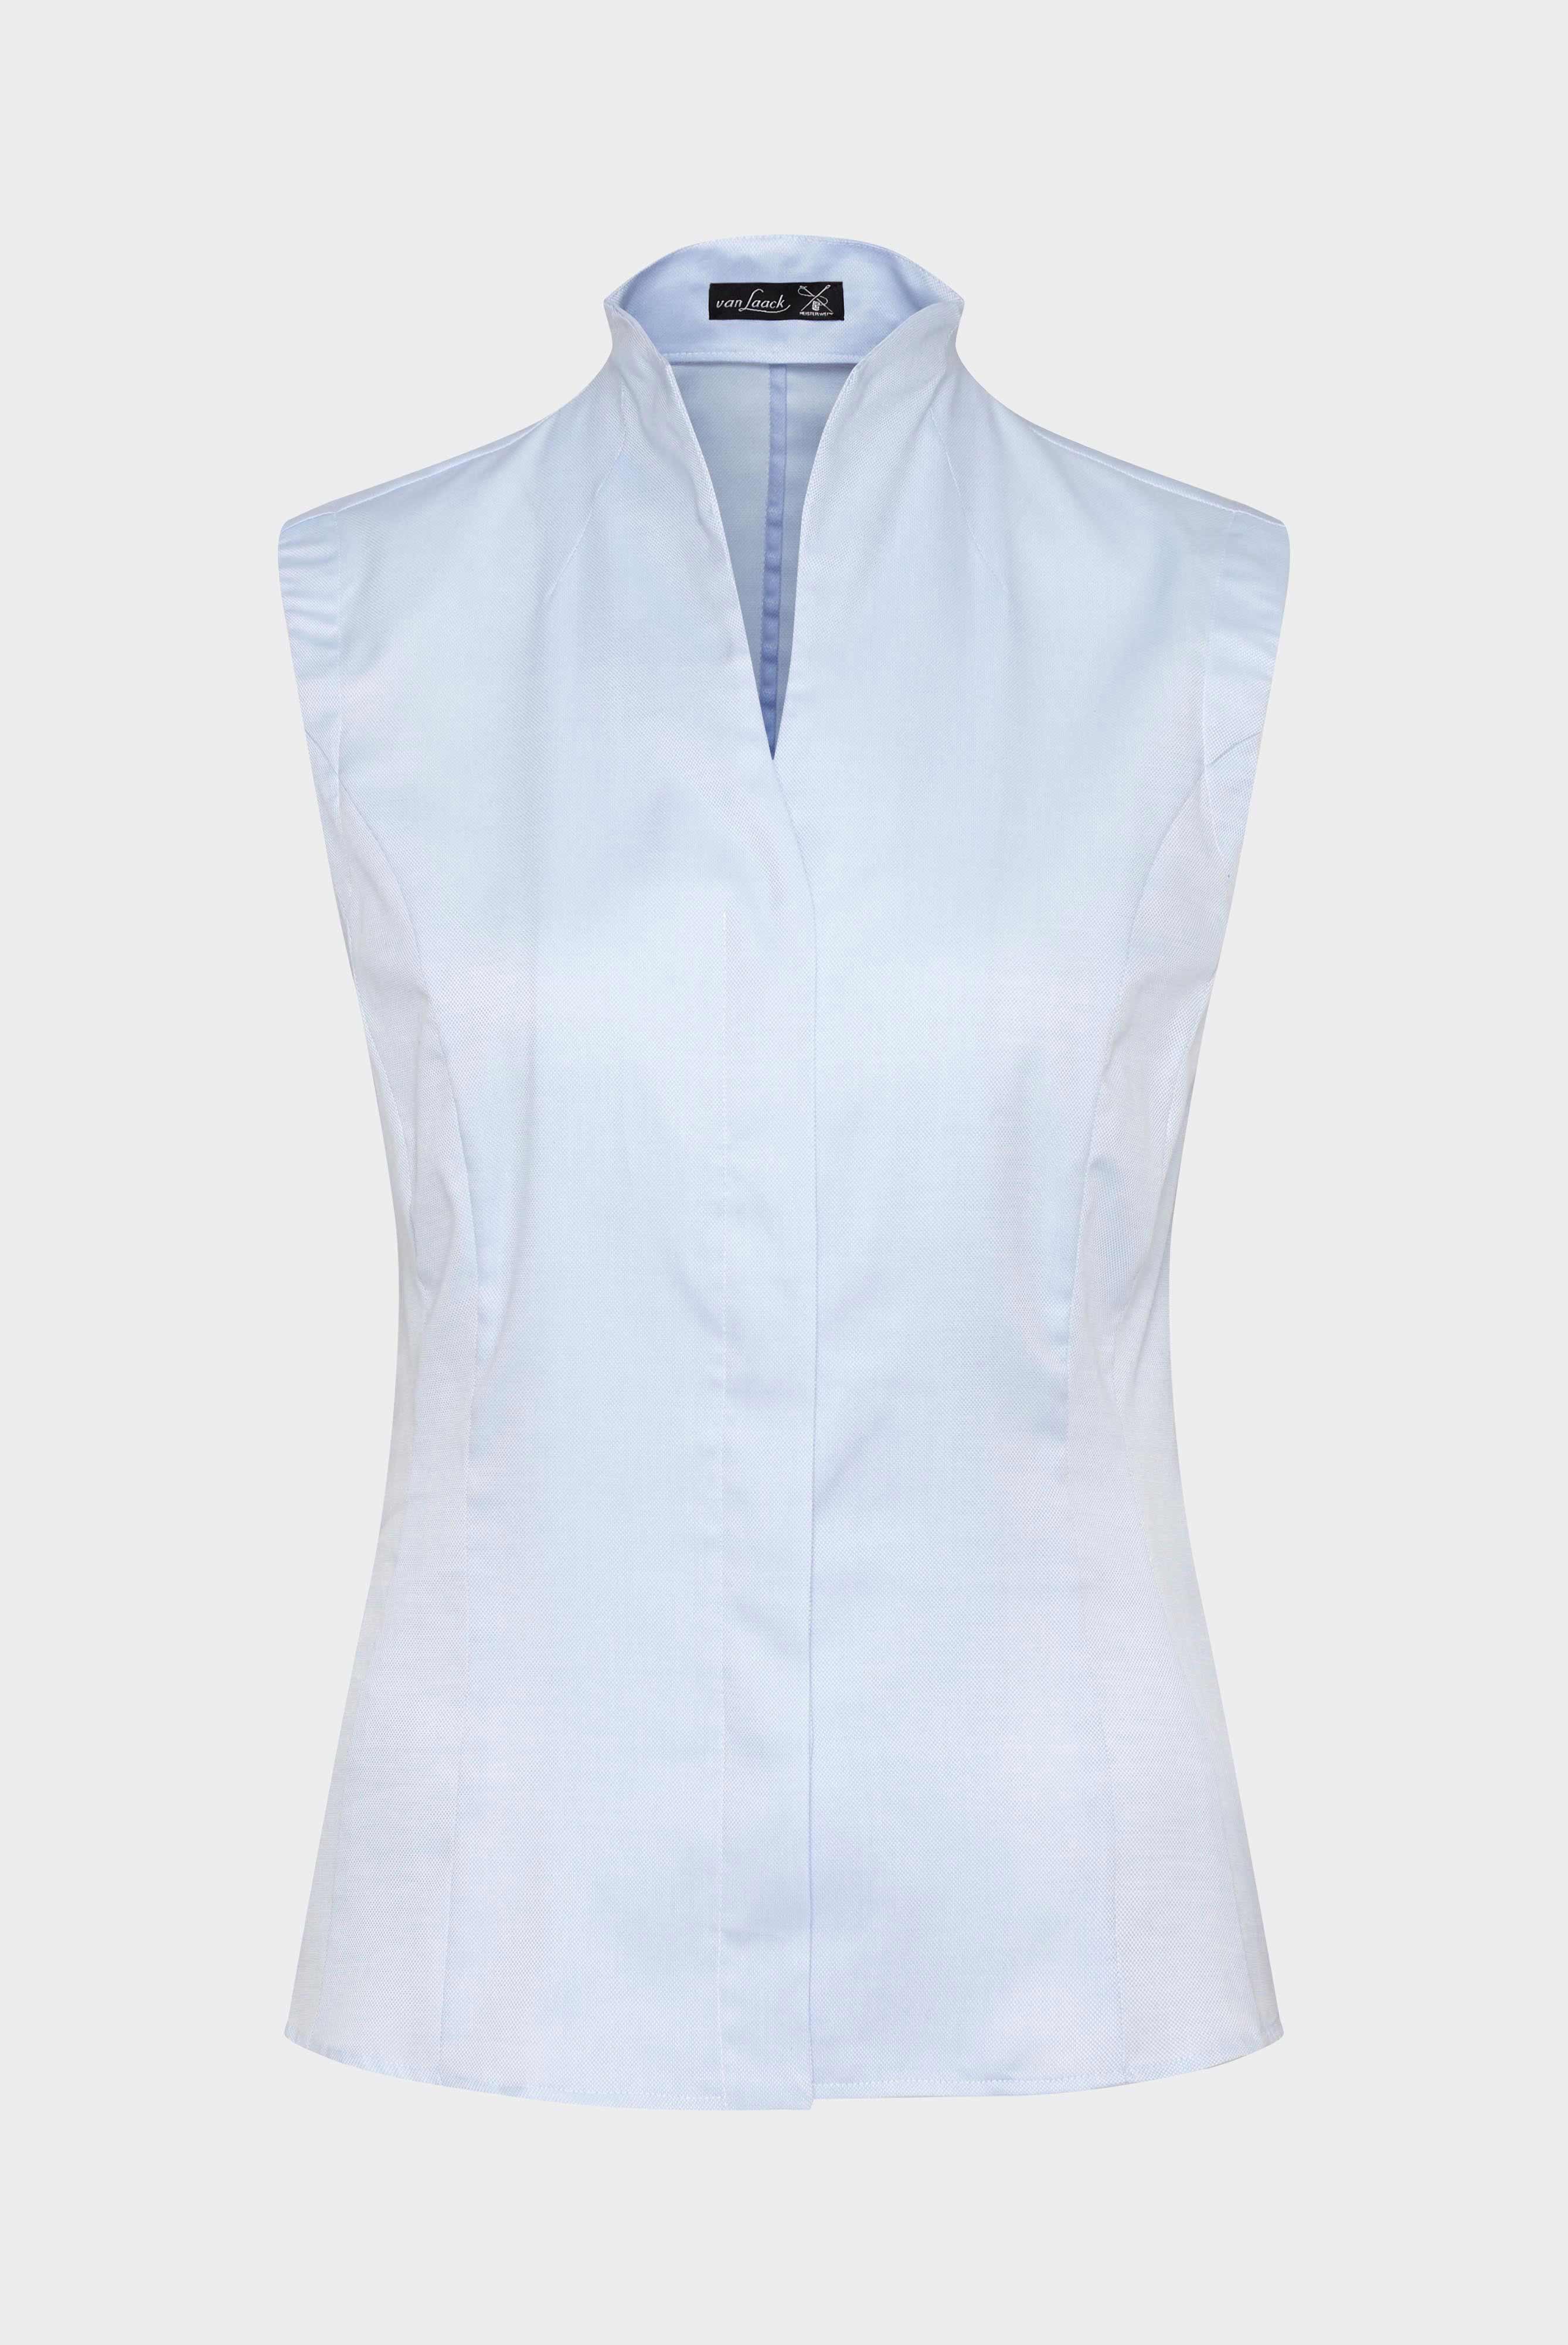 Business Blouses+Sleeveless Chalice Collar Blouse+05.5857.73.130532.720.32